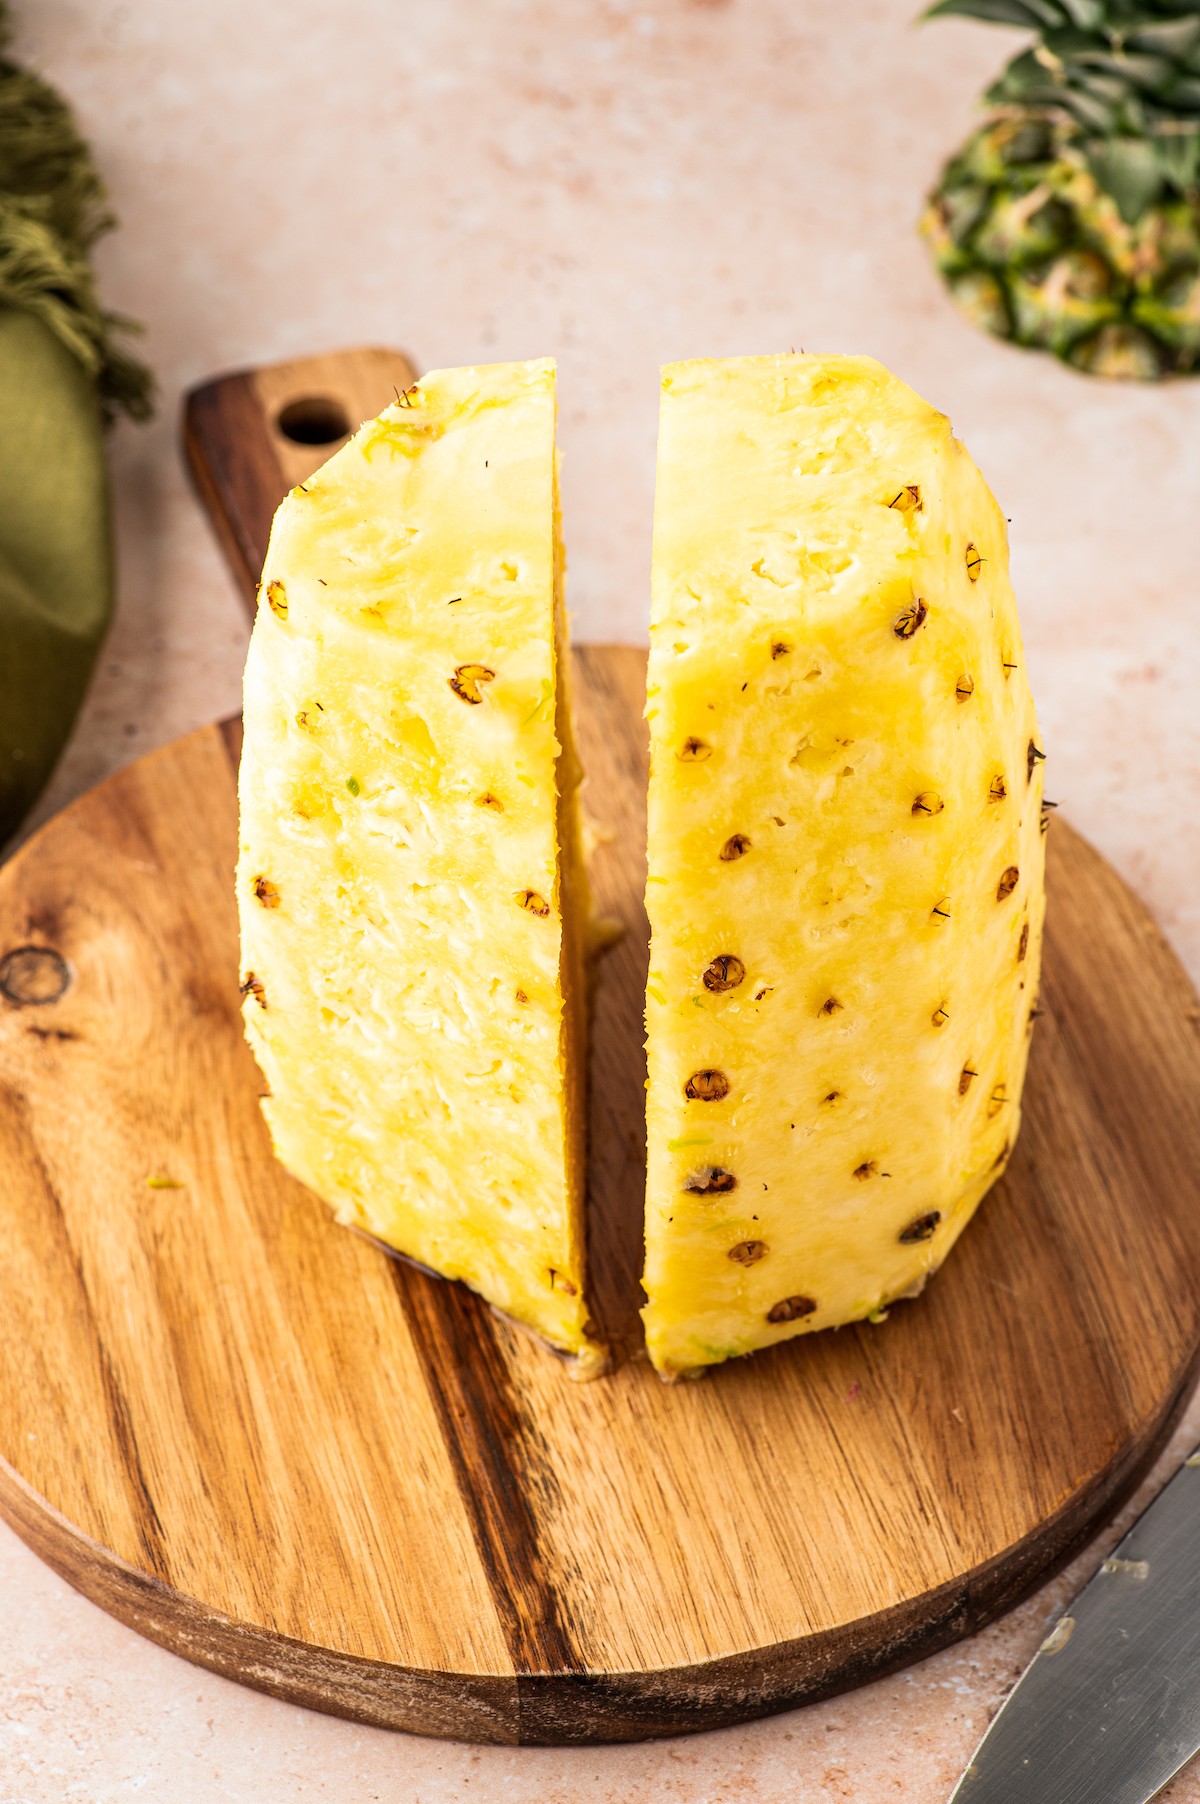 Cutting the pineapple in half from top to bottom.